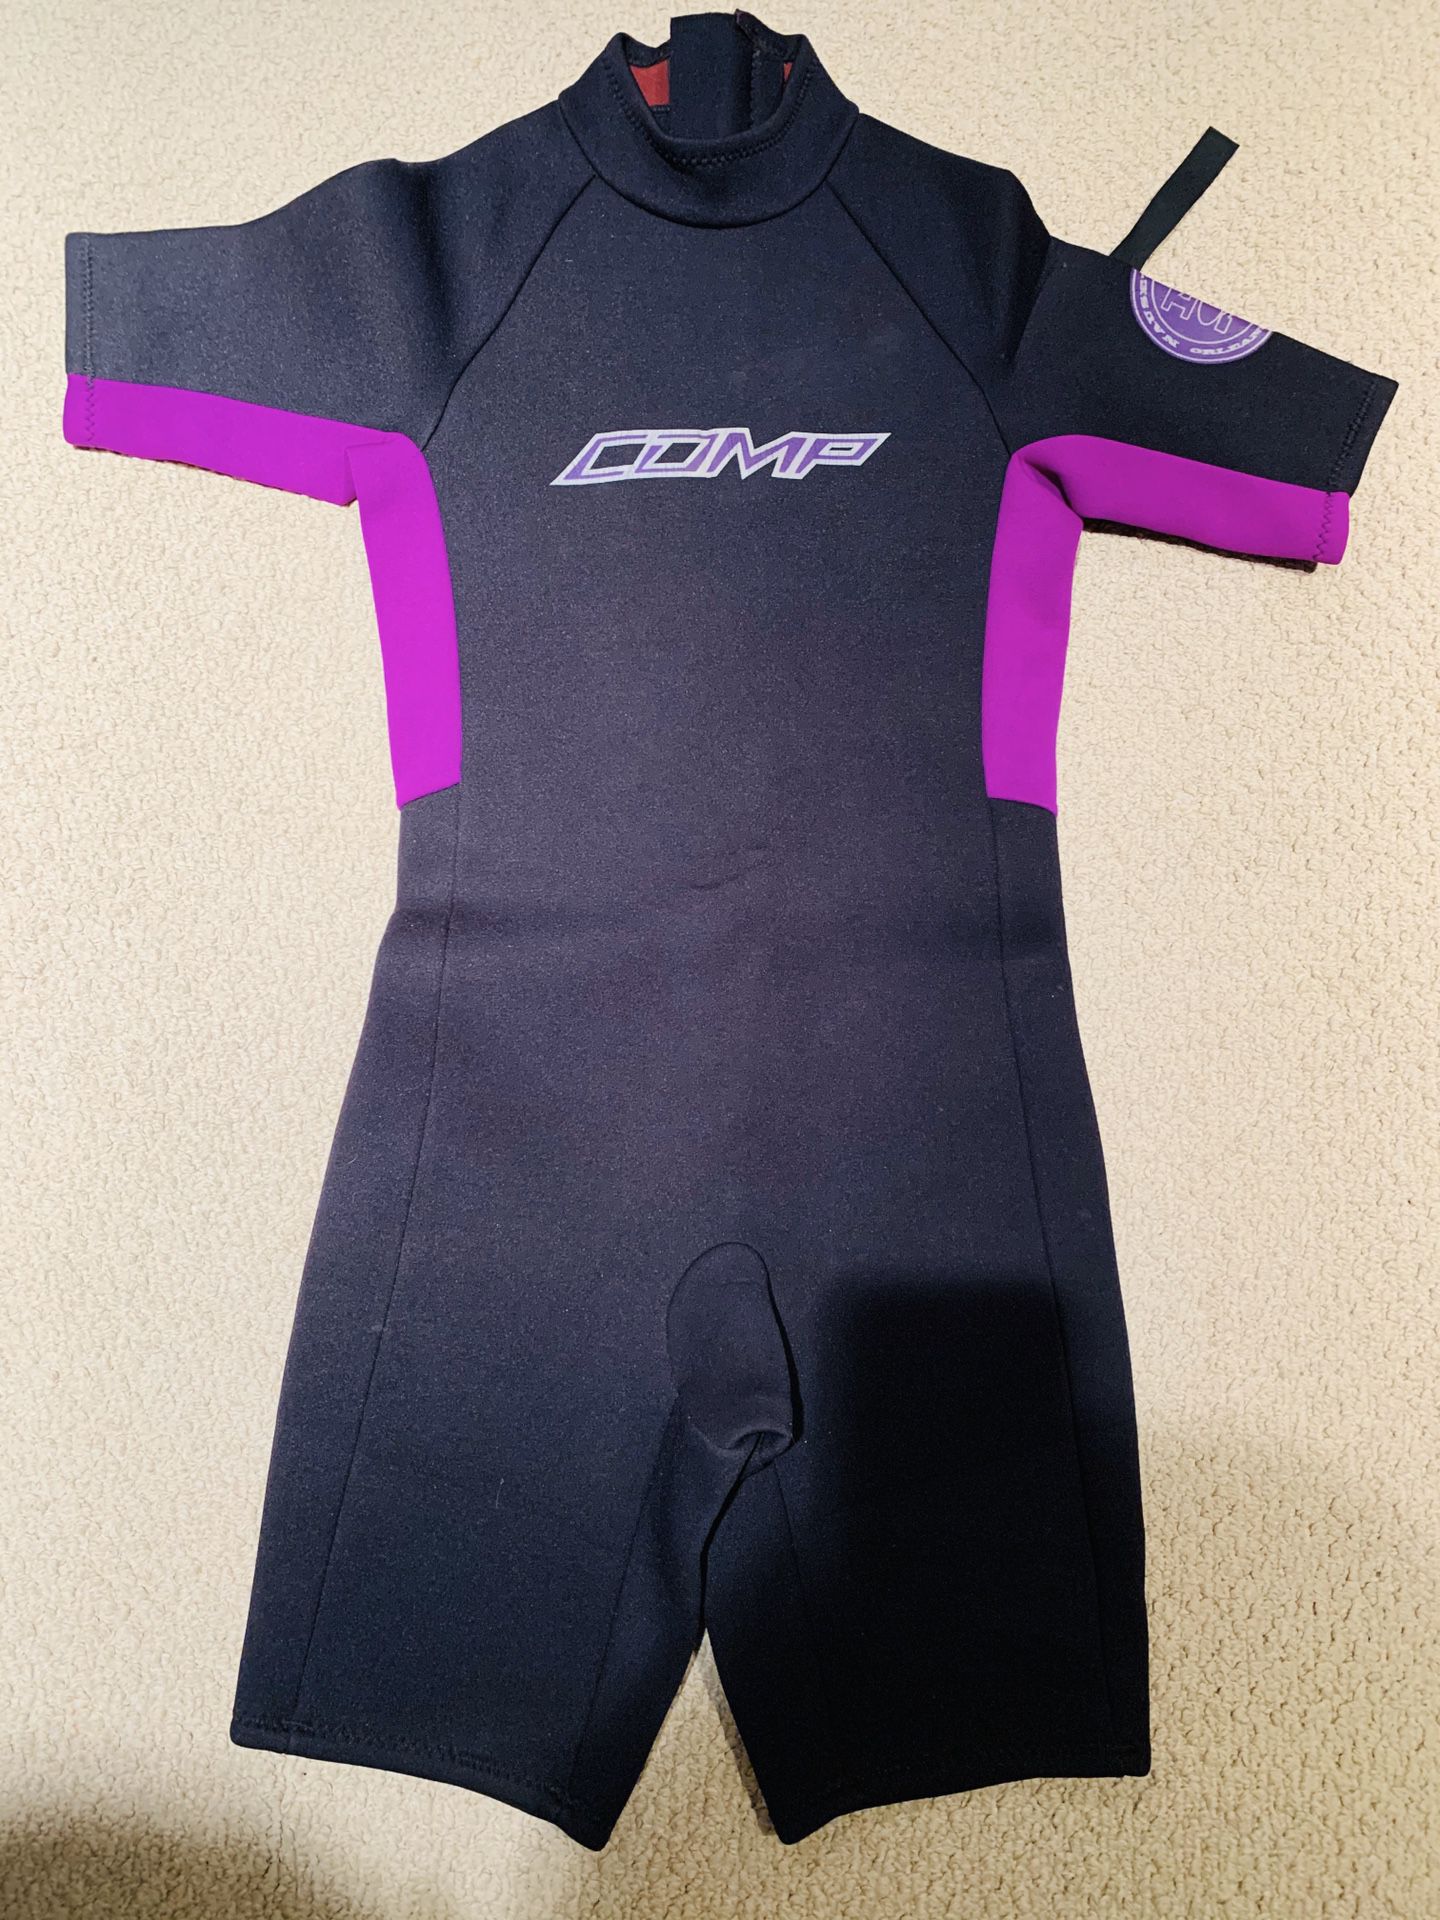 Junior/Kids Shortsleeved Wetsuit Size 16 preowned good condition